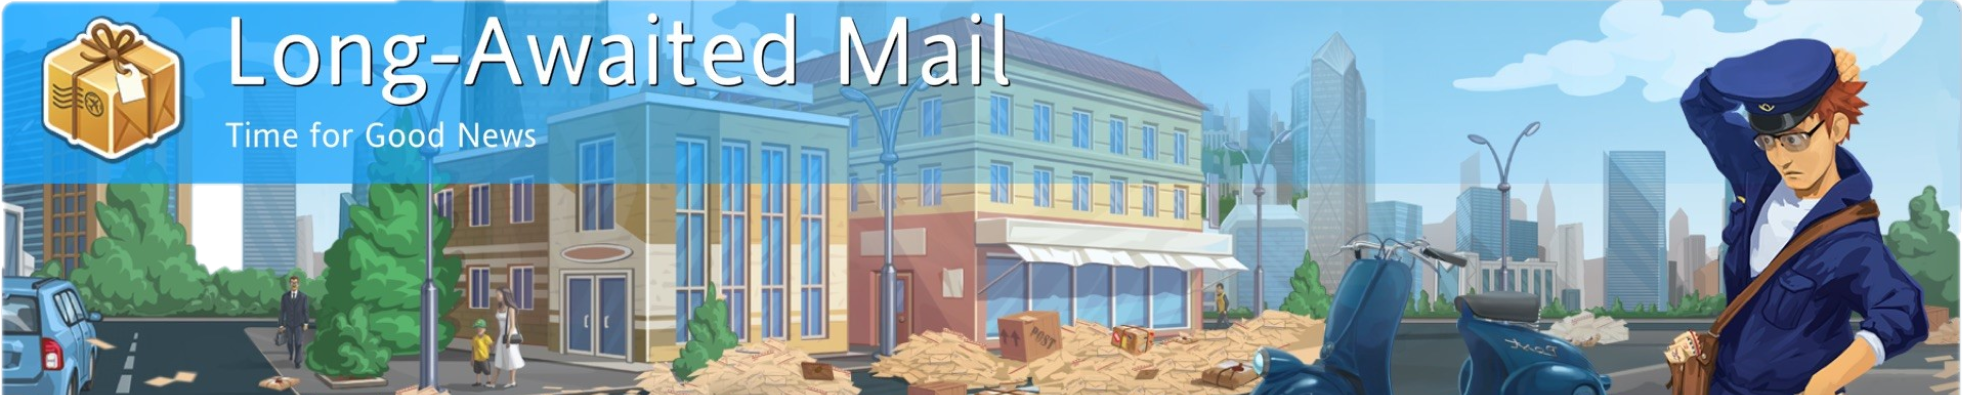 long awaited mail banner.png